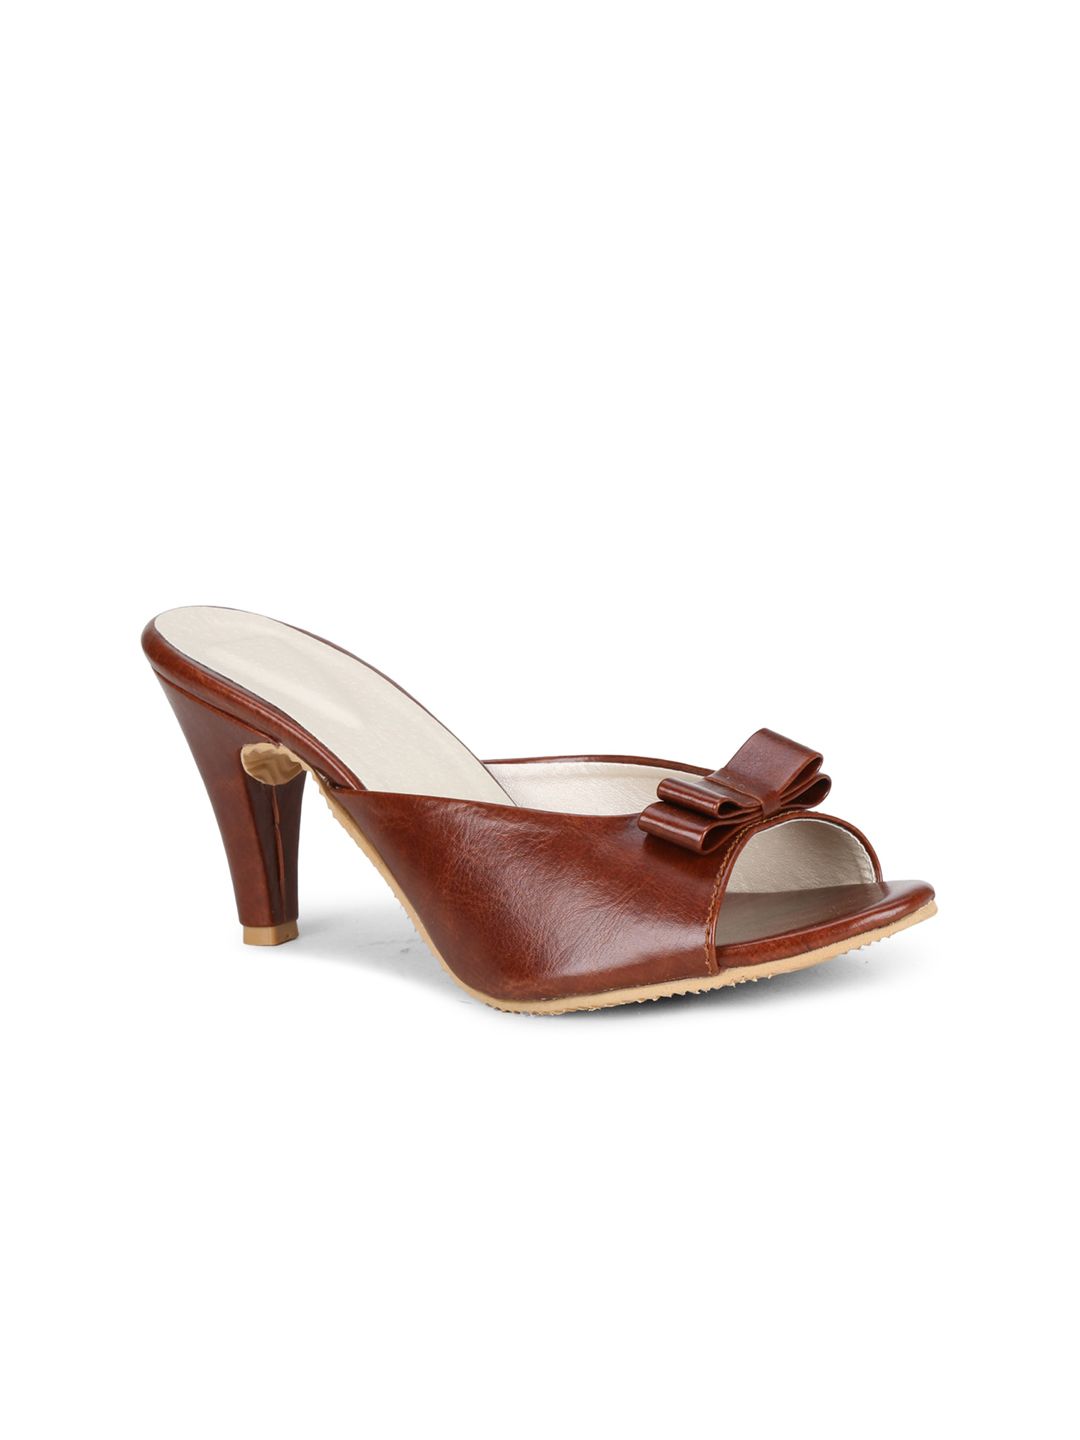 Misto Brown PU Peep Toes with Bows Price in India